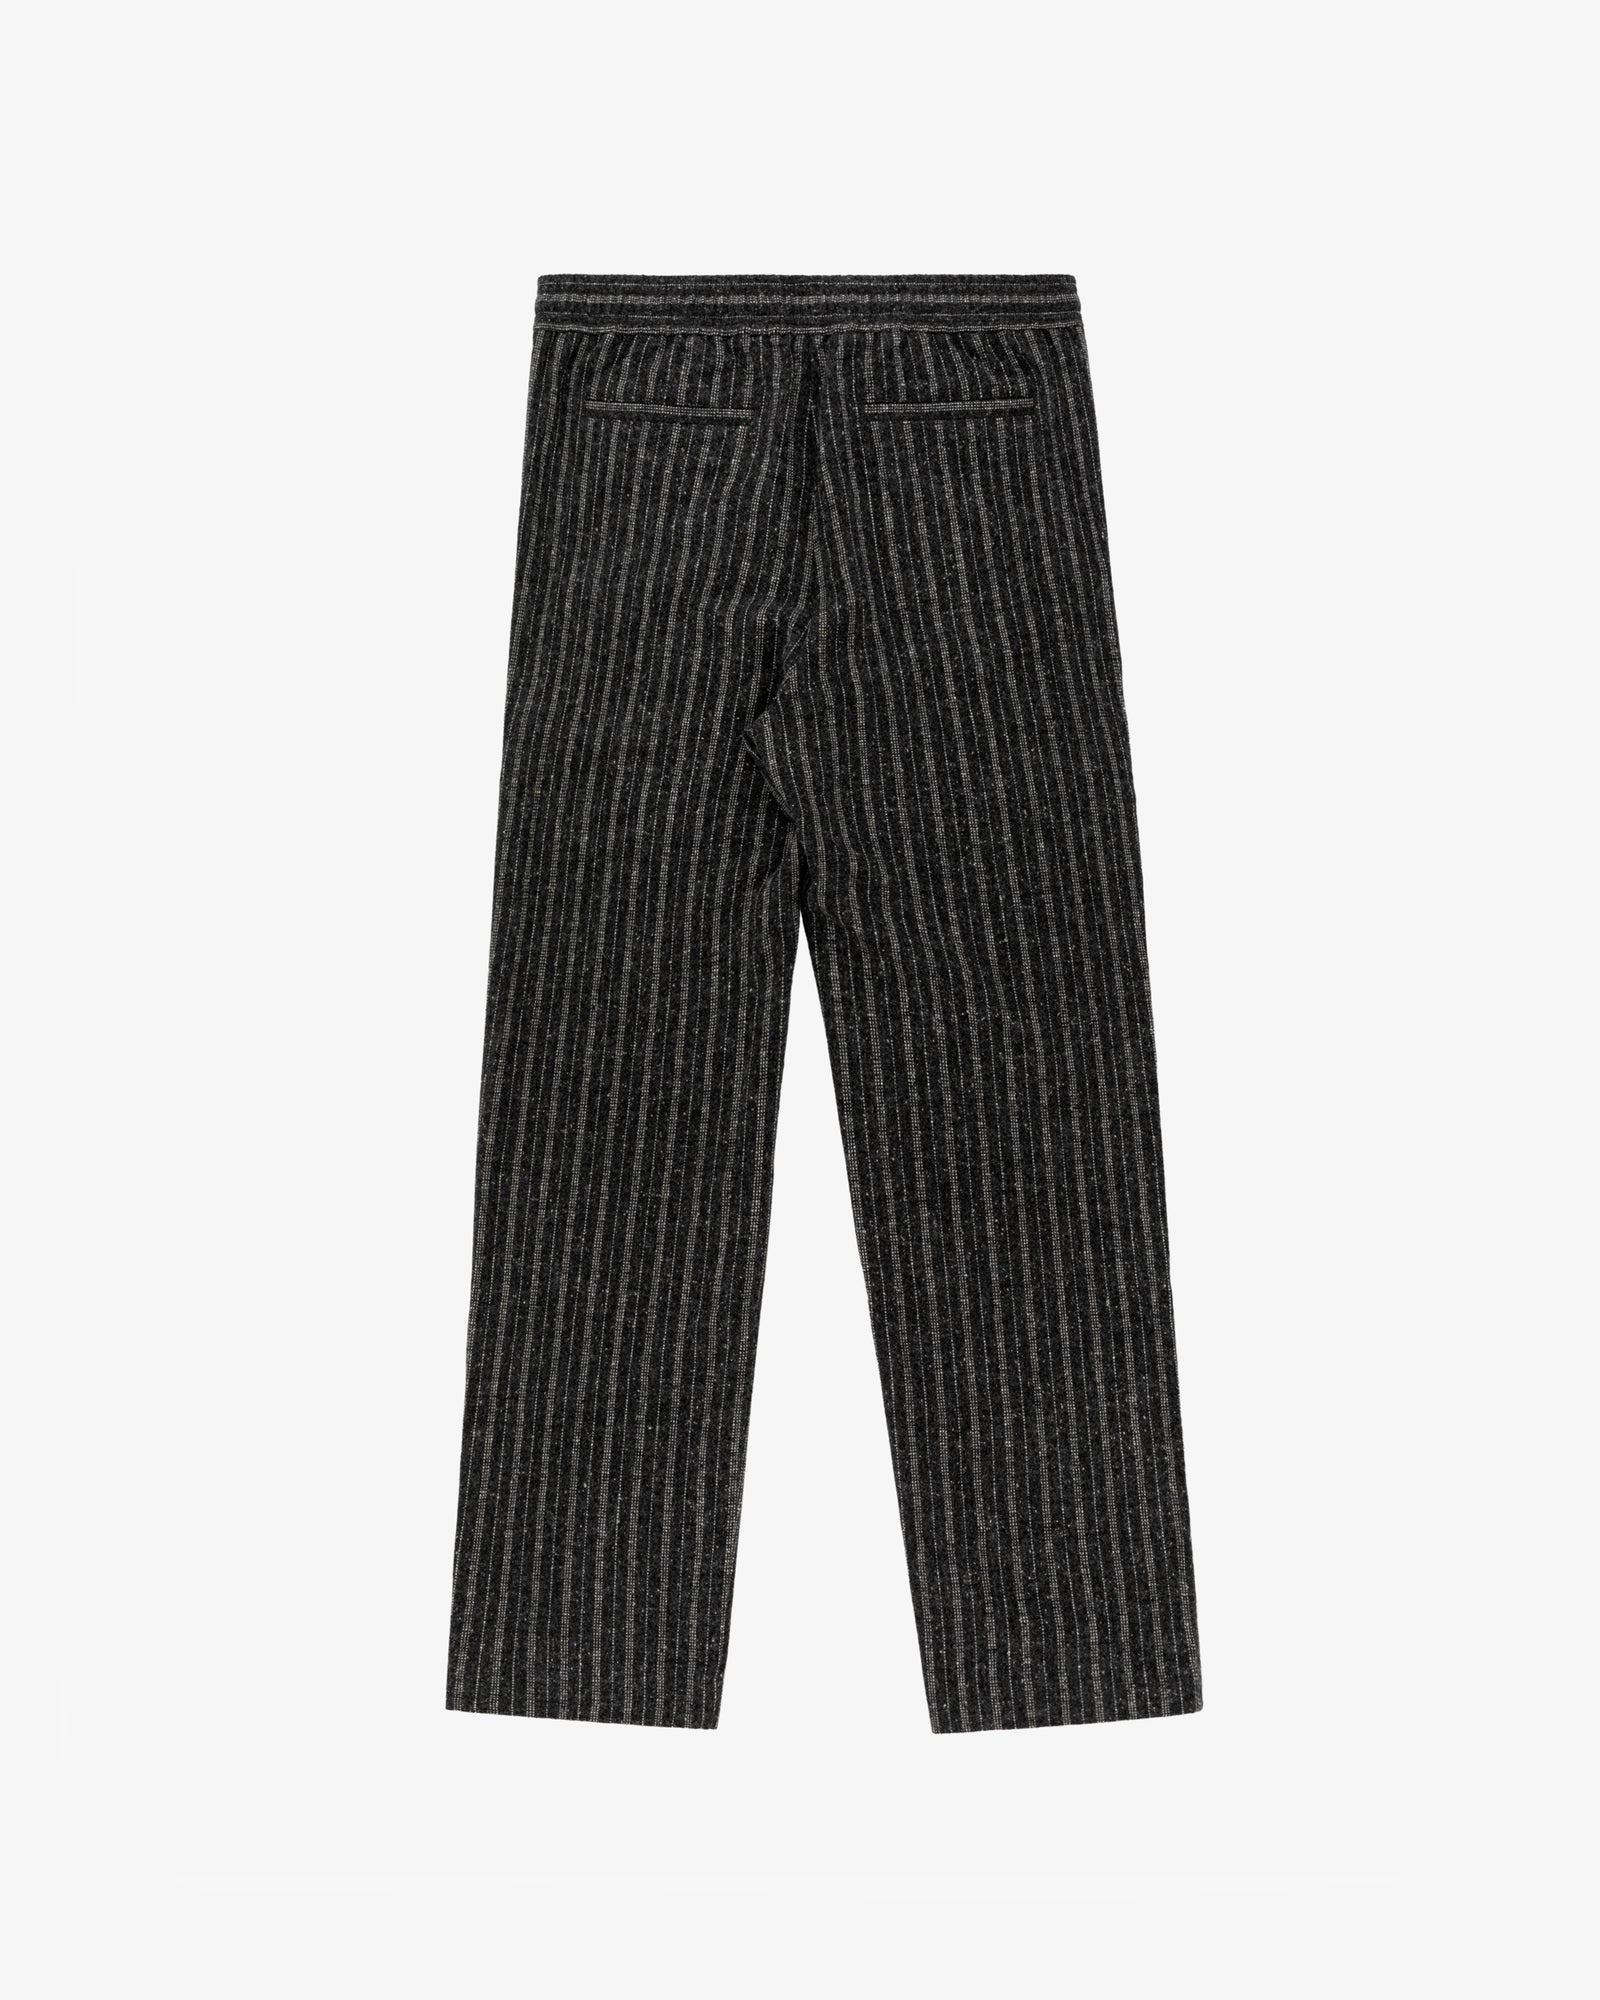 Worsted Wool Elasticated Dress Trouser